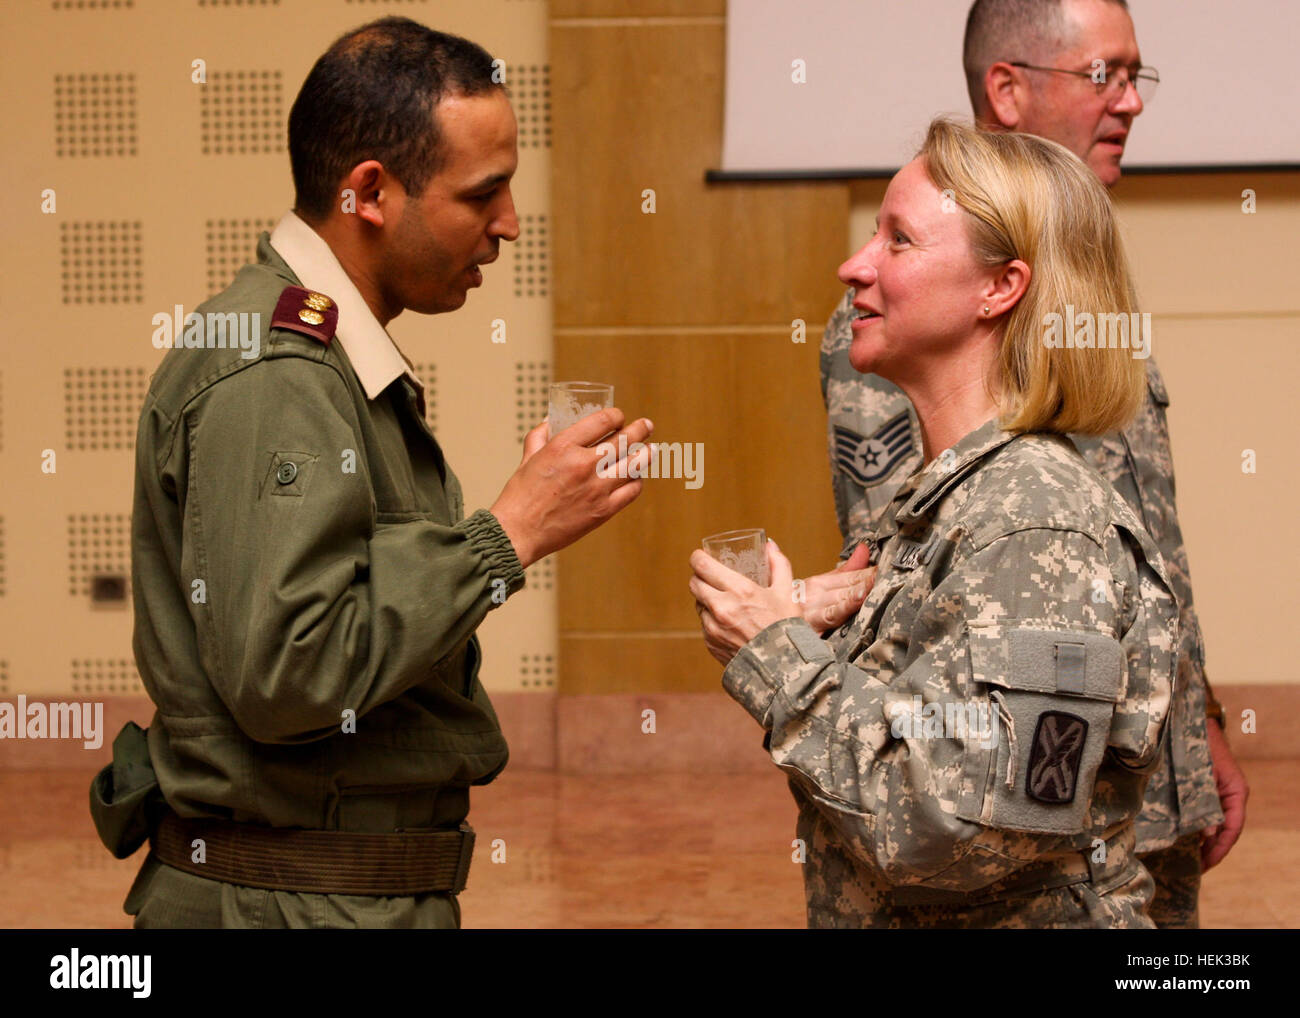 Staff Sgt. Anette Aldridge of West Jordan, Utah, a French linguist serving with Company C, 142nd Military Intelligence Battalion, Utah Army National Guard, talks with a colonel of the Moroccan Army after a chemical awareness presentation given at the Moroccan military's South Command Headquarters in Agadir, May 16. Aldridge, along with other French and Arabic linguists of the 142nd MI Bn., were attached to the 151st Expeditionary Medical Group, Utah Air National Guard, to assist them as translators during humanitarian missions conducted as part of Exercise AFRICAN LION 2010. (U.S. Army photo b Stock Photo